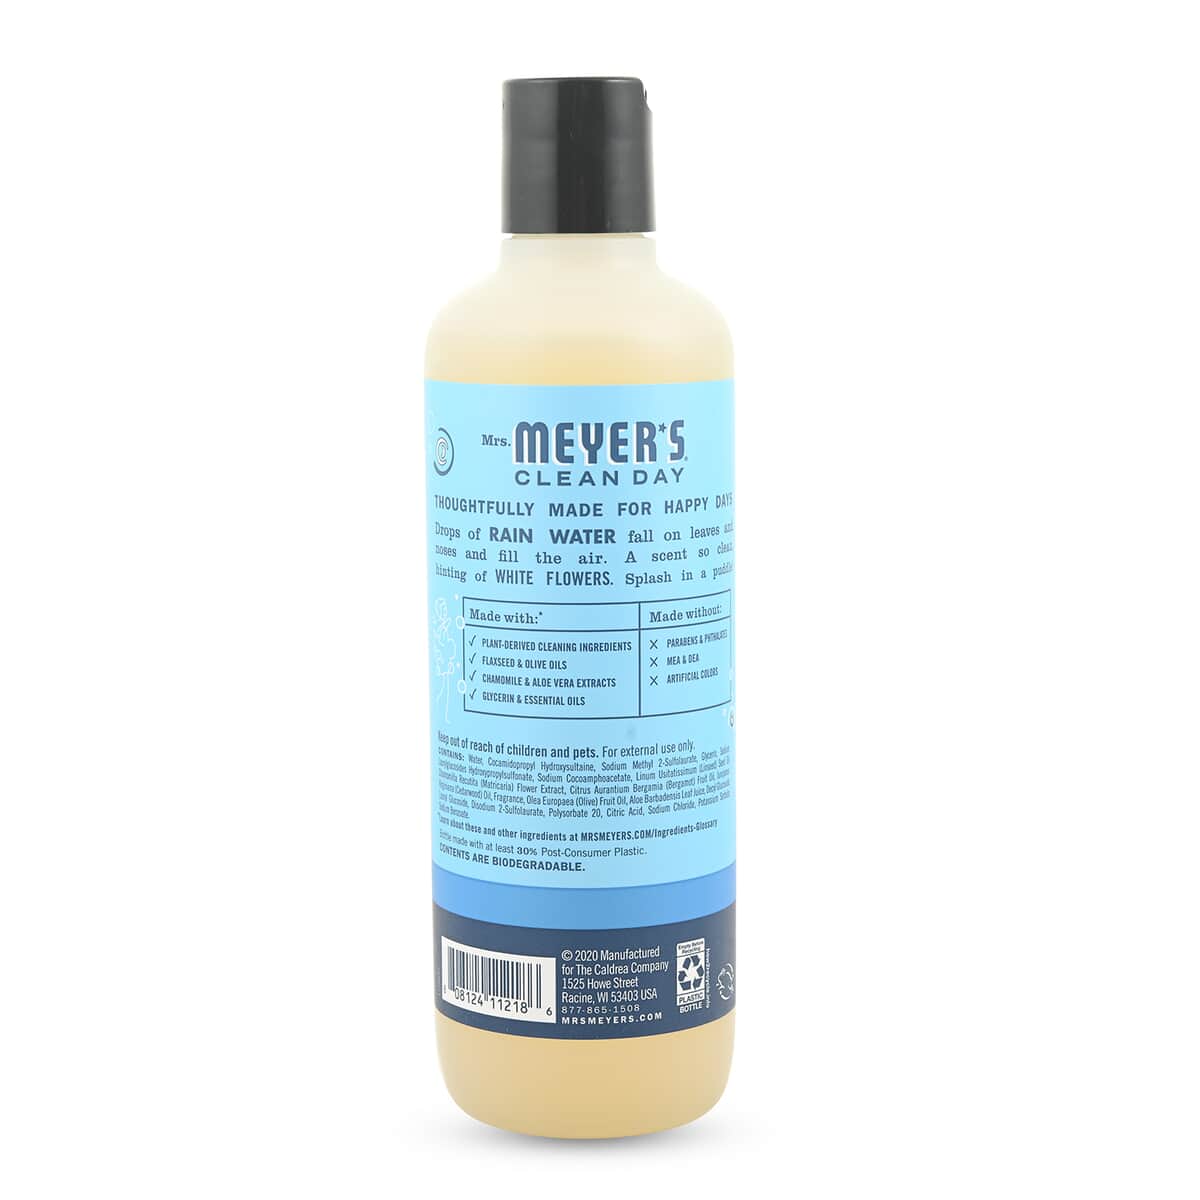 Mrs. Meyer's Clean Day Body Wash - Rainwater 16 oz image number 4